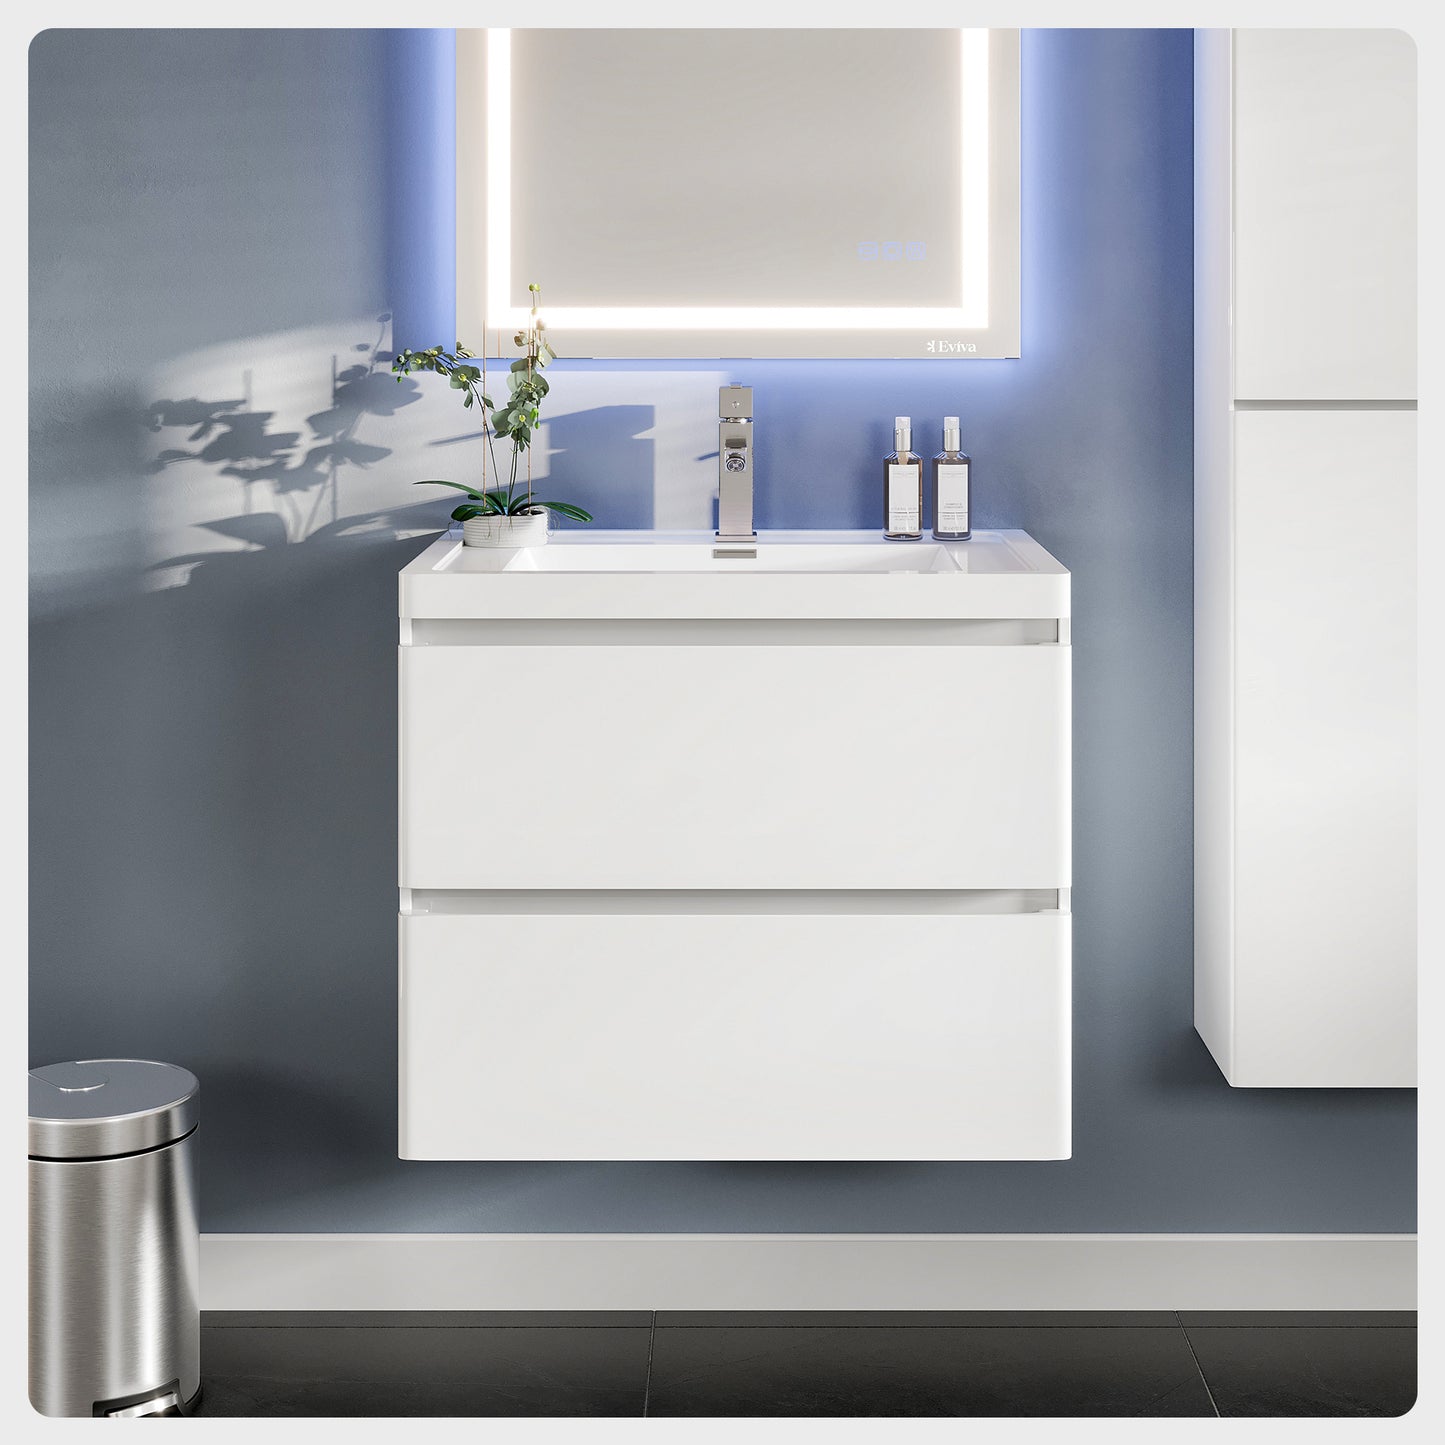 Glazzy 28"W x 19"D White Wall Mount Bathroom Vanity with Acrylic Countertop and Integrated Sink